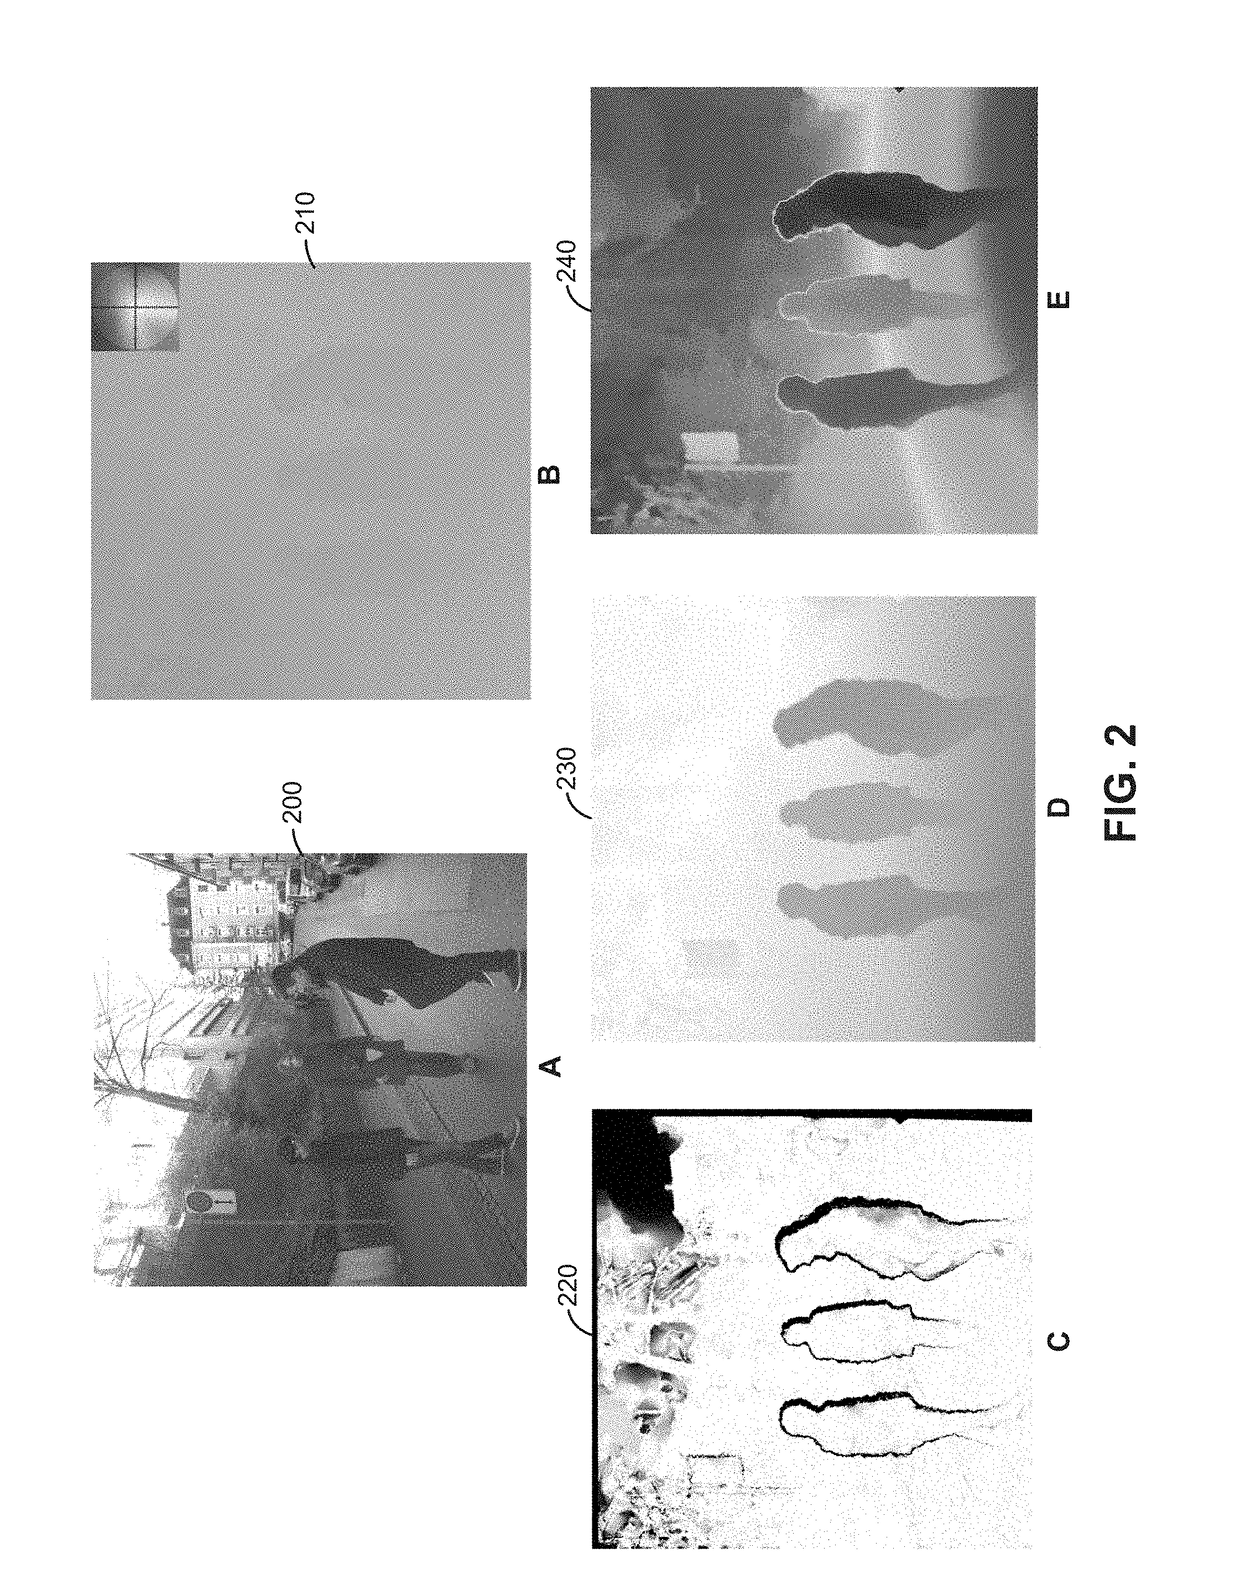 Video segmentation from an uncalibrated camera array